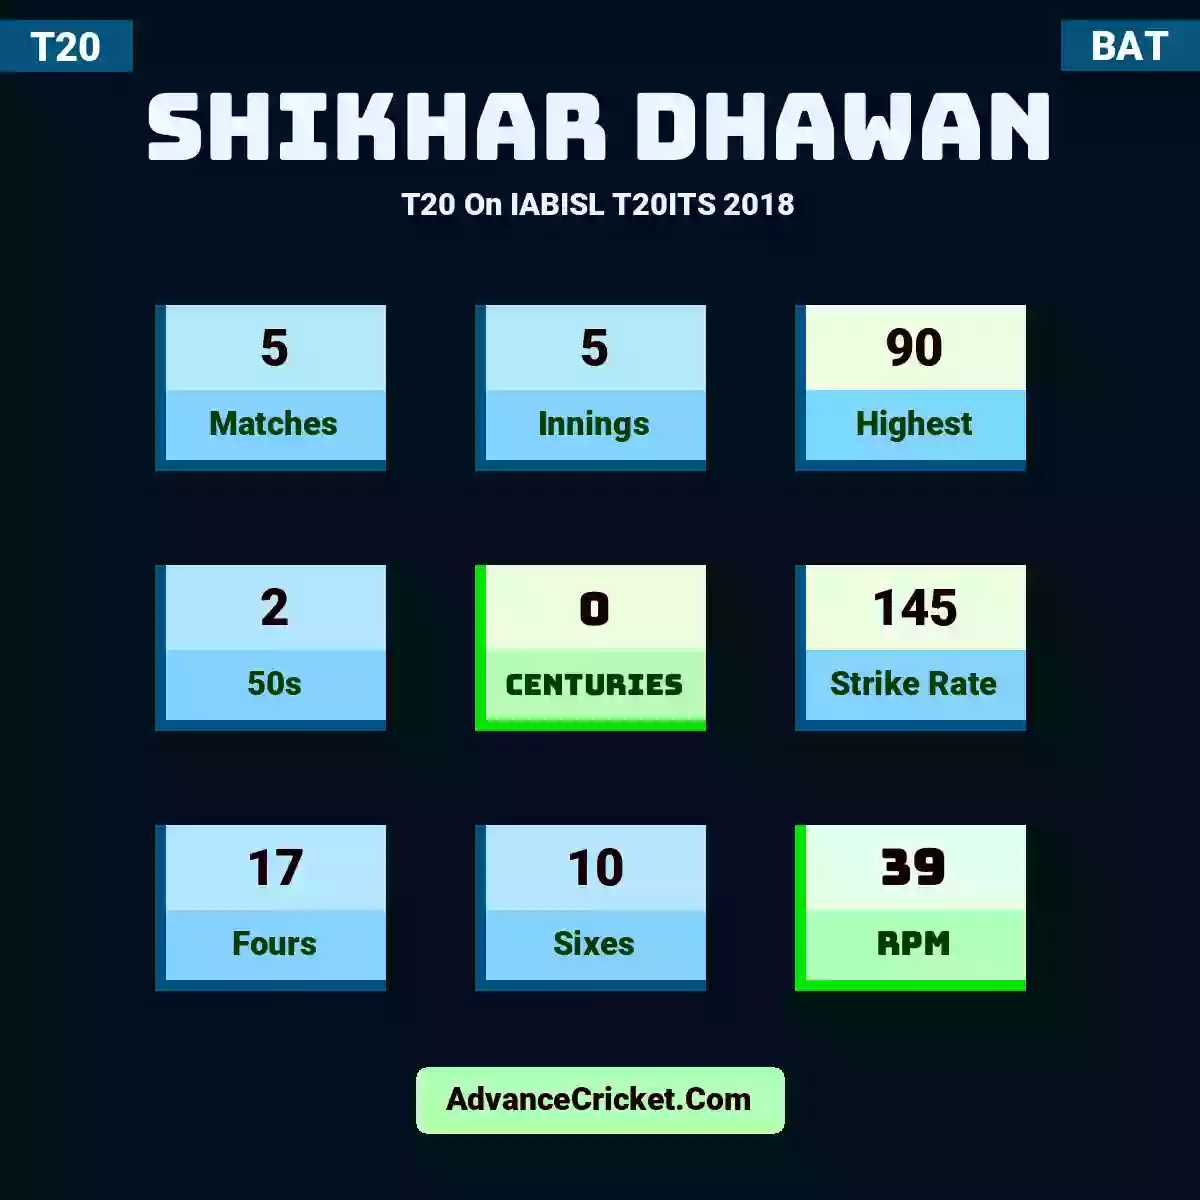 Shikhar Dhawan T20  On IABISL T20ITS 2018, Shikhar Dhawan played 5 matches, scored 90 runs as highest, 2 half-centuries, and 0 centuries, with a strike rate of 145. S.Dhawan hit 17 fours and 10 sixes, with an RPM of 39.